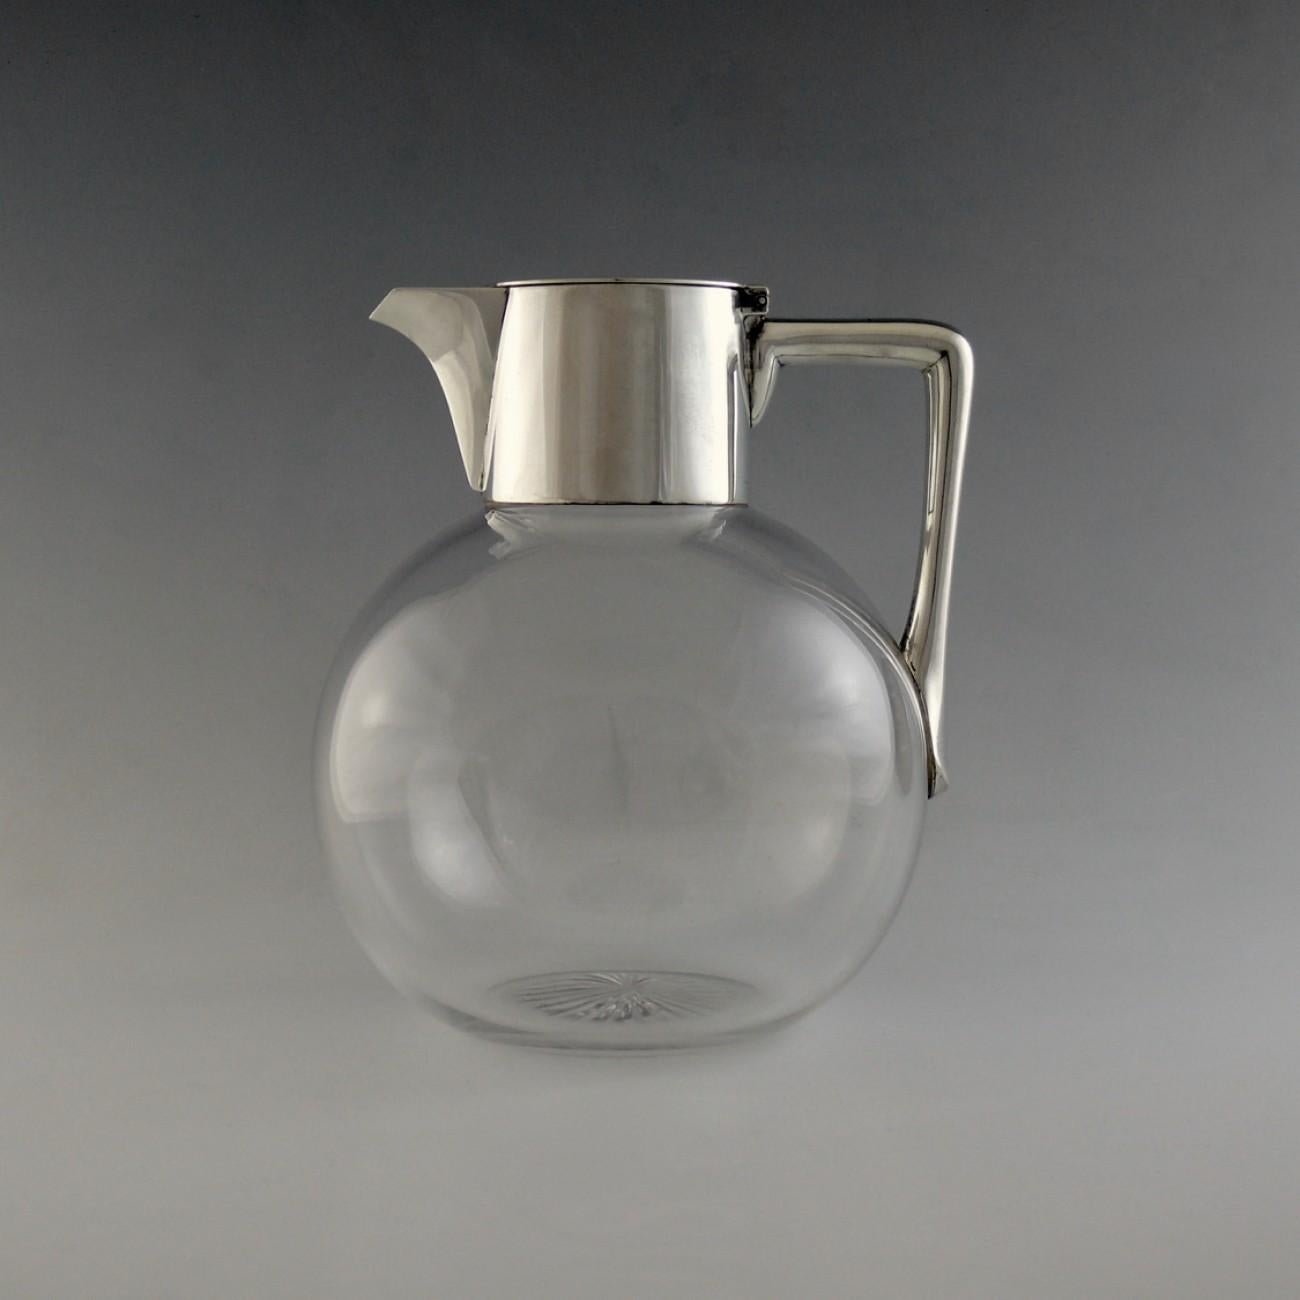 An elegant silver mounted glass claret jug with star cut base and silver top with handle, hallmarked London 1892; by Hukin and Heath. Deceptive in that, although modest looking in size, it holds exactly one bottle.

Dimensions: 12 cm/4¾ inches